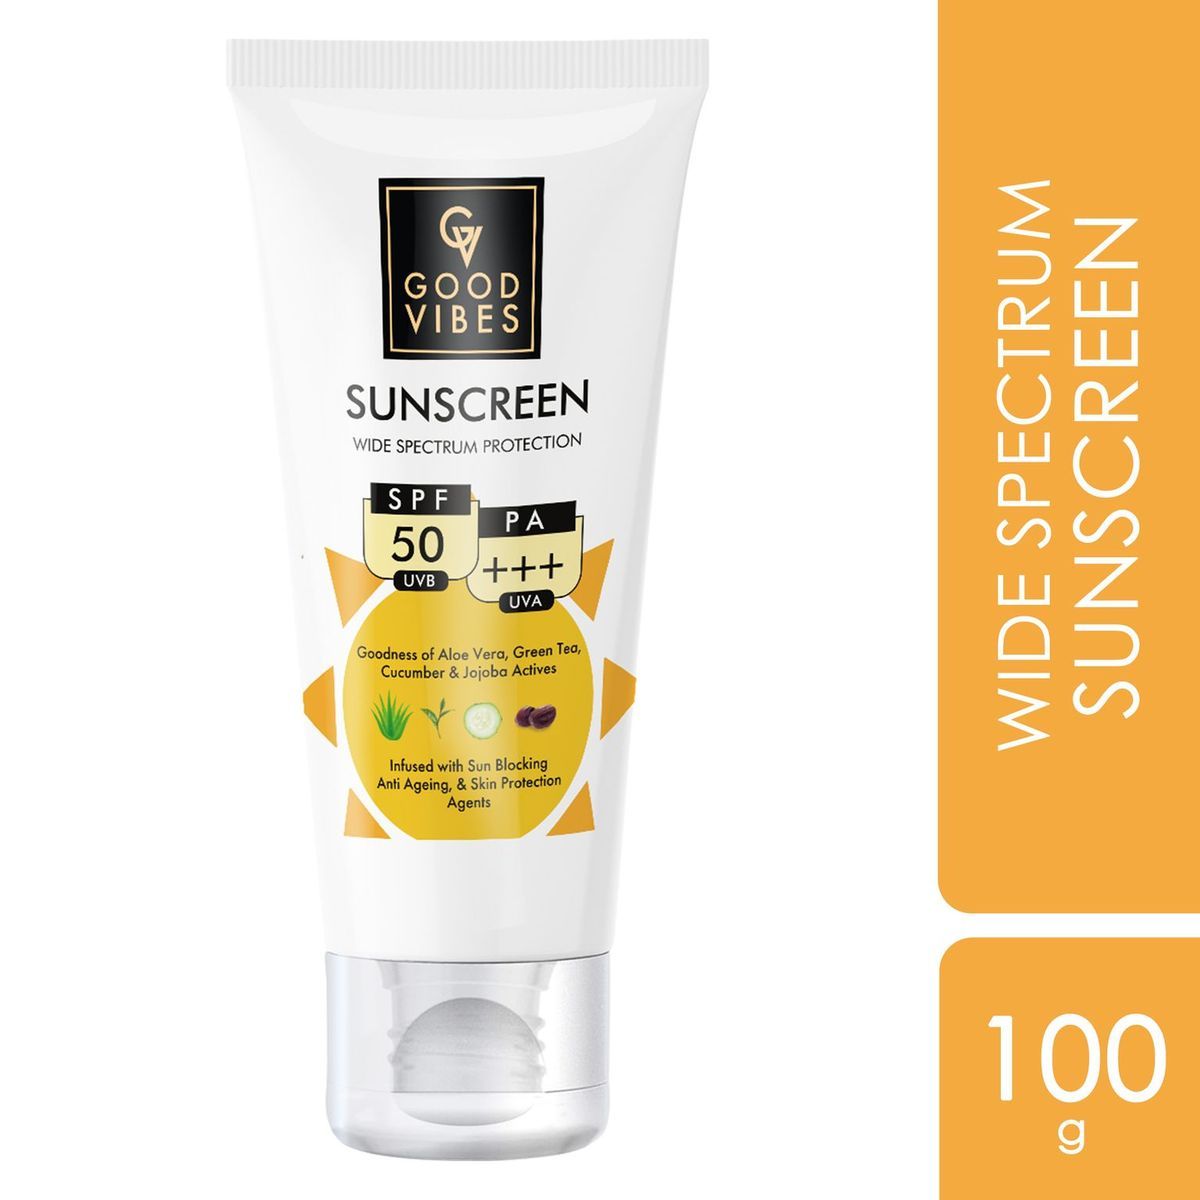 Good Vibes Wide Spectrum Protection Sunscreen with SPF 50 | Non-Greasy, Anti-Ageing | With Aloe Vera | No Parabens, No Animal Testing (100 g)